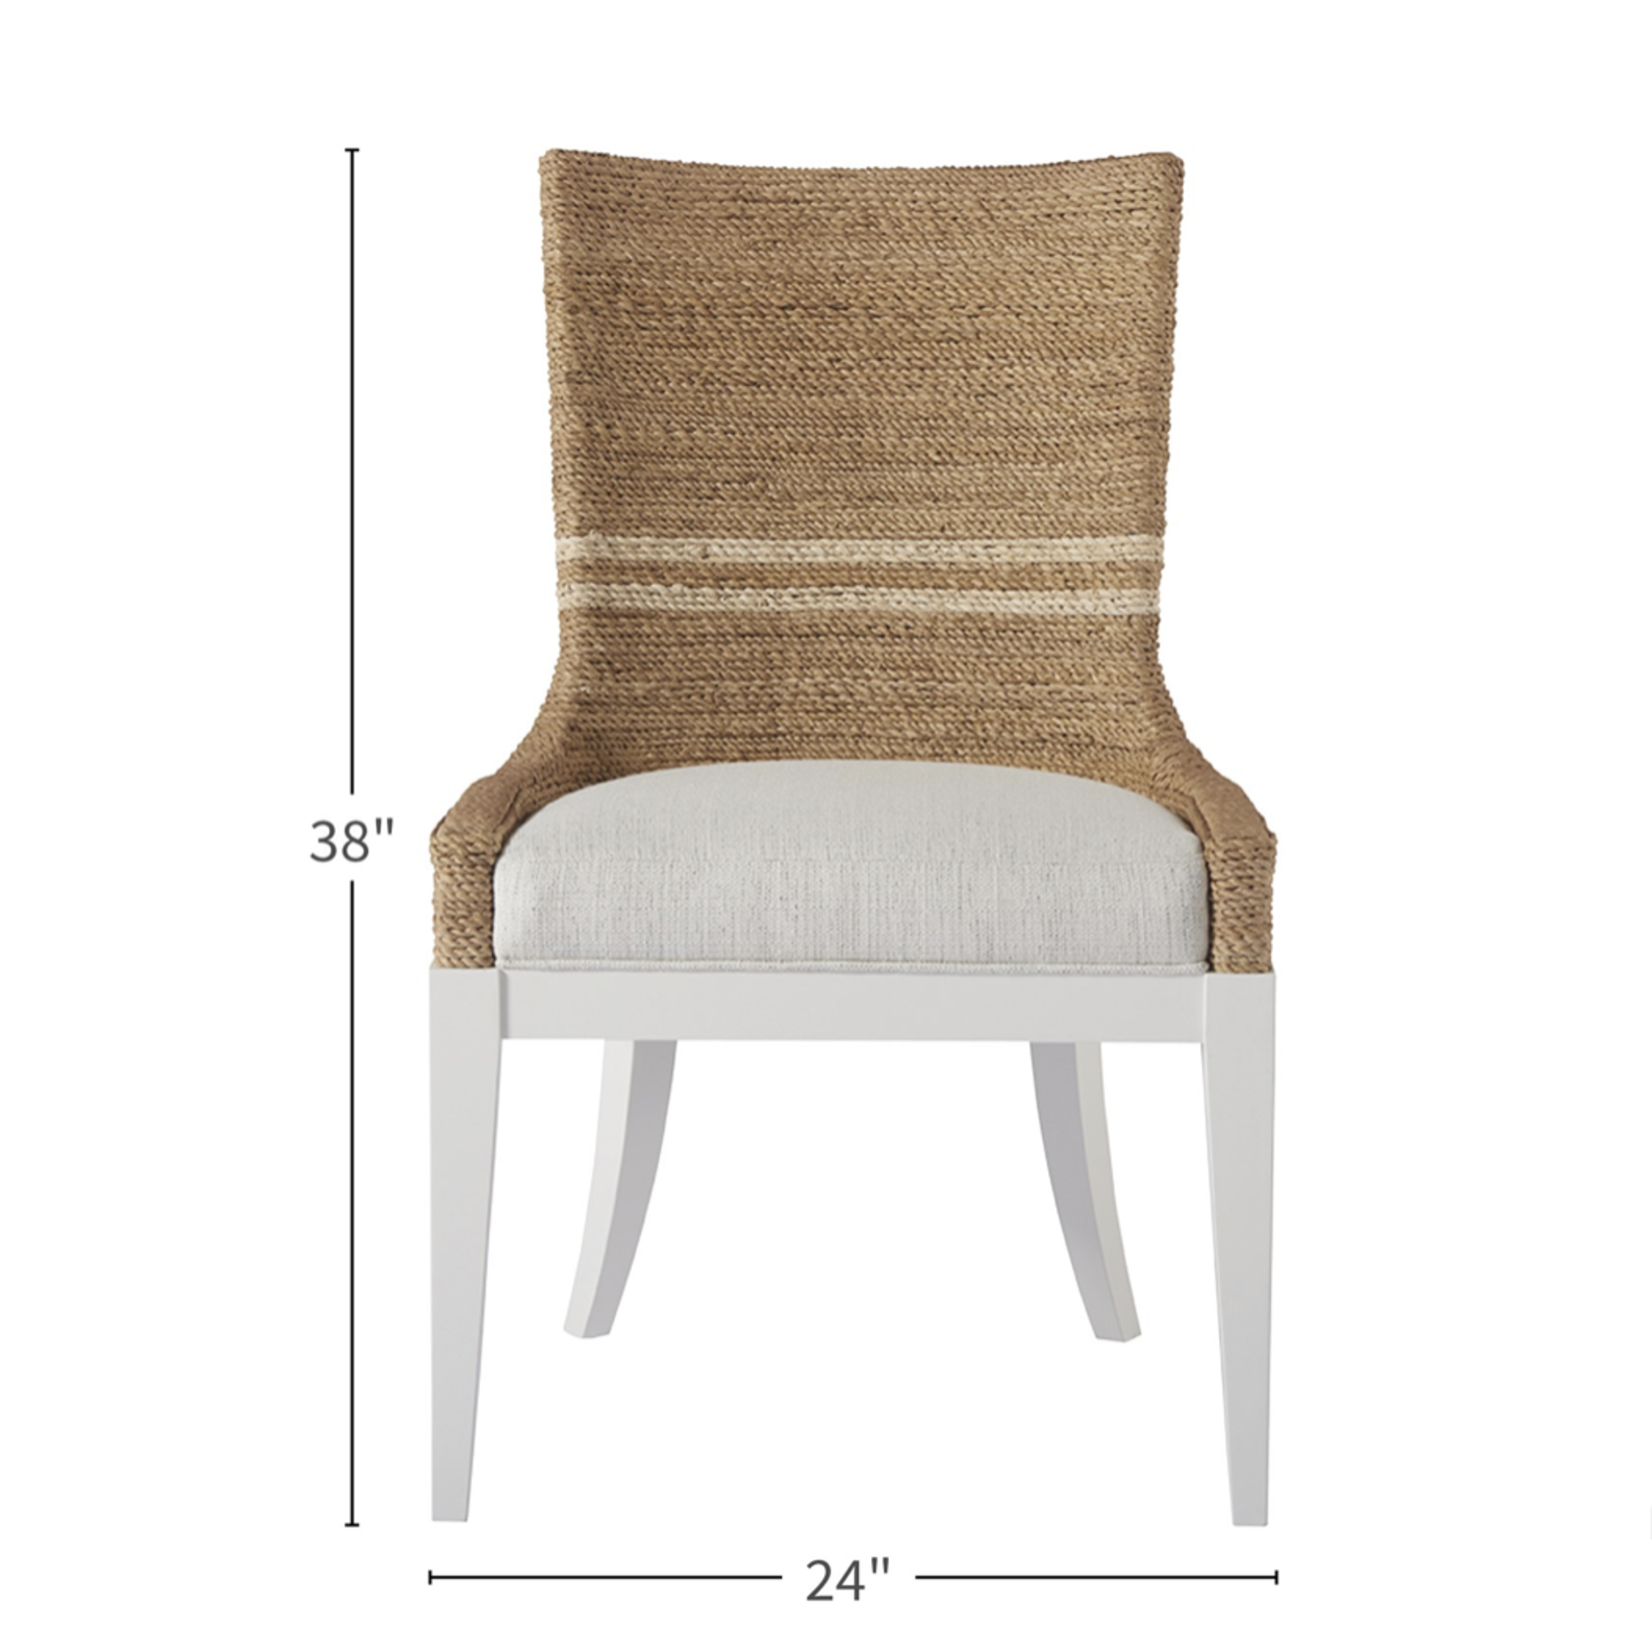 Outside The Box Siesta Key Abaca Rope Woven & Dove Live Smart Performance Wood Dining Chair